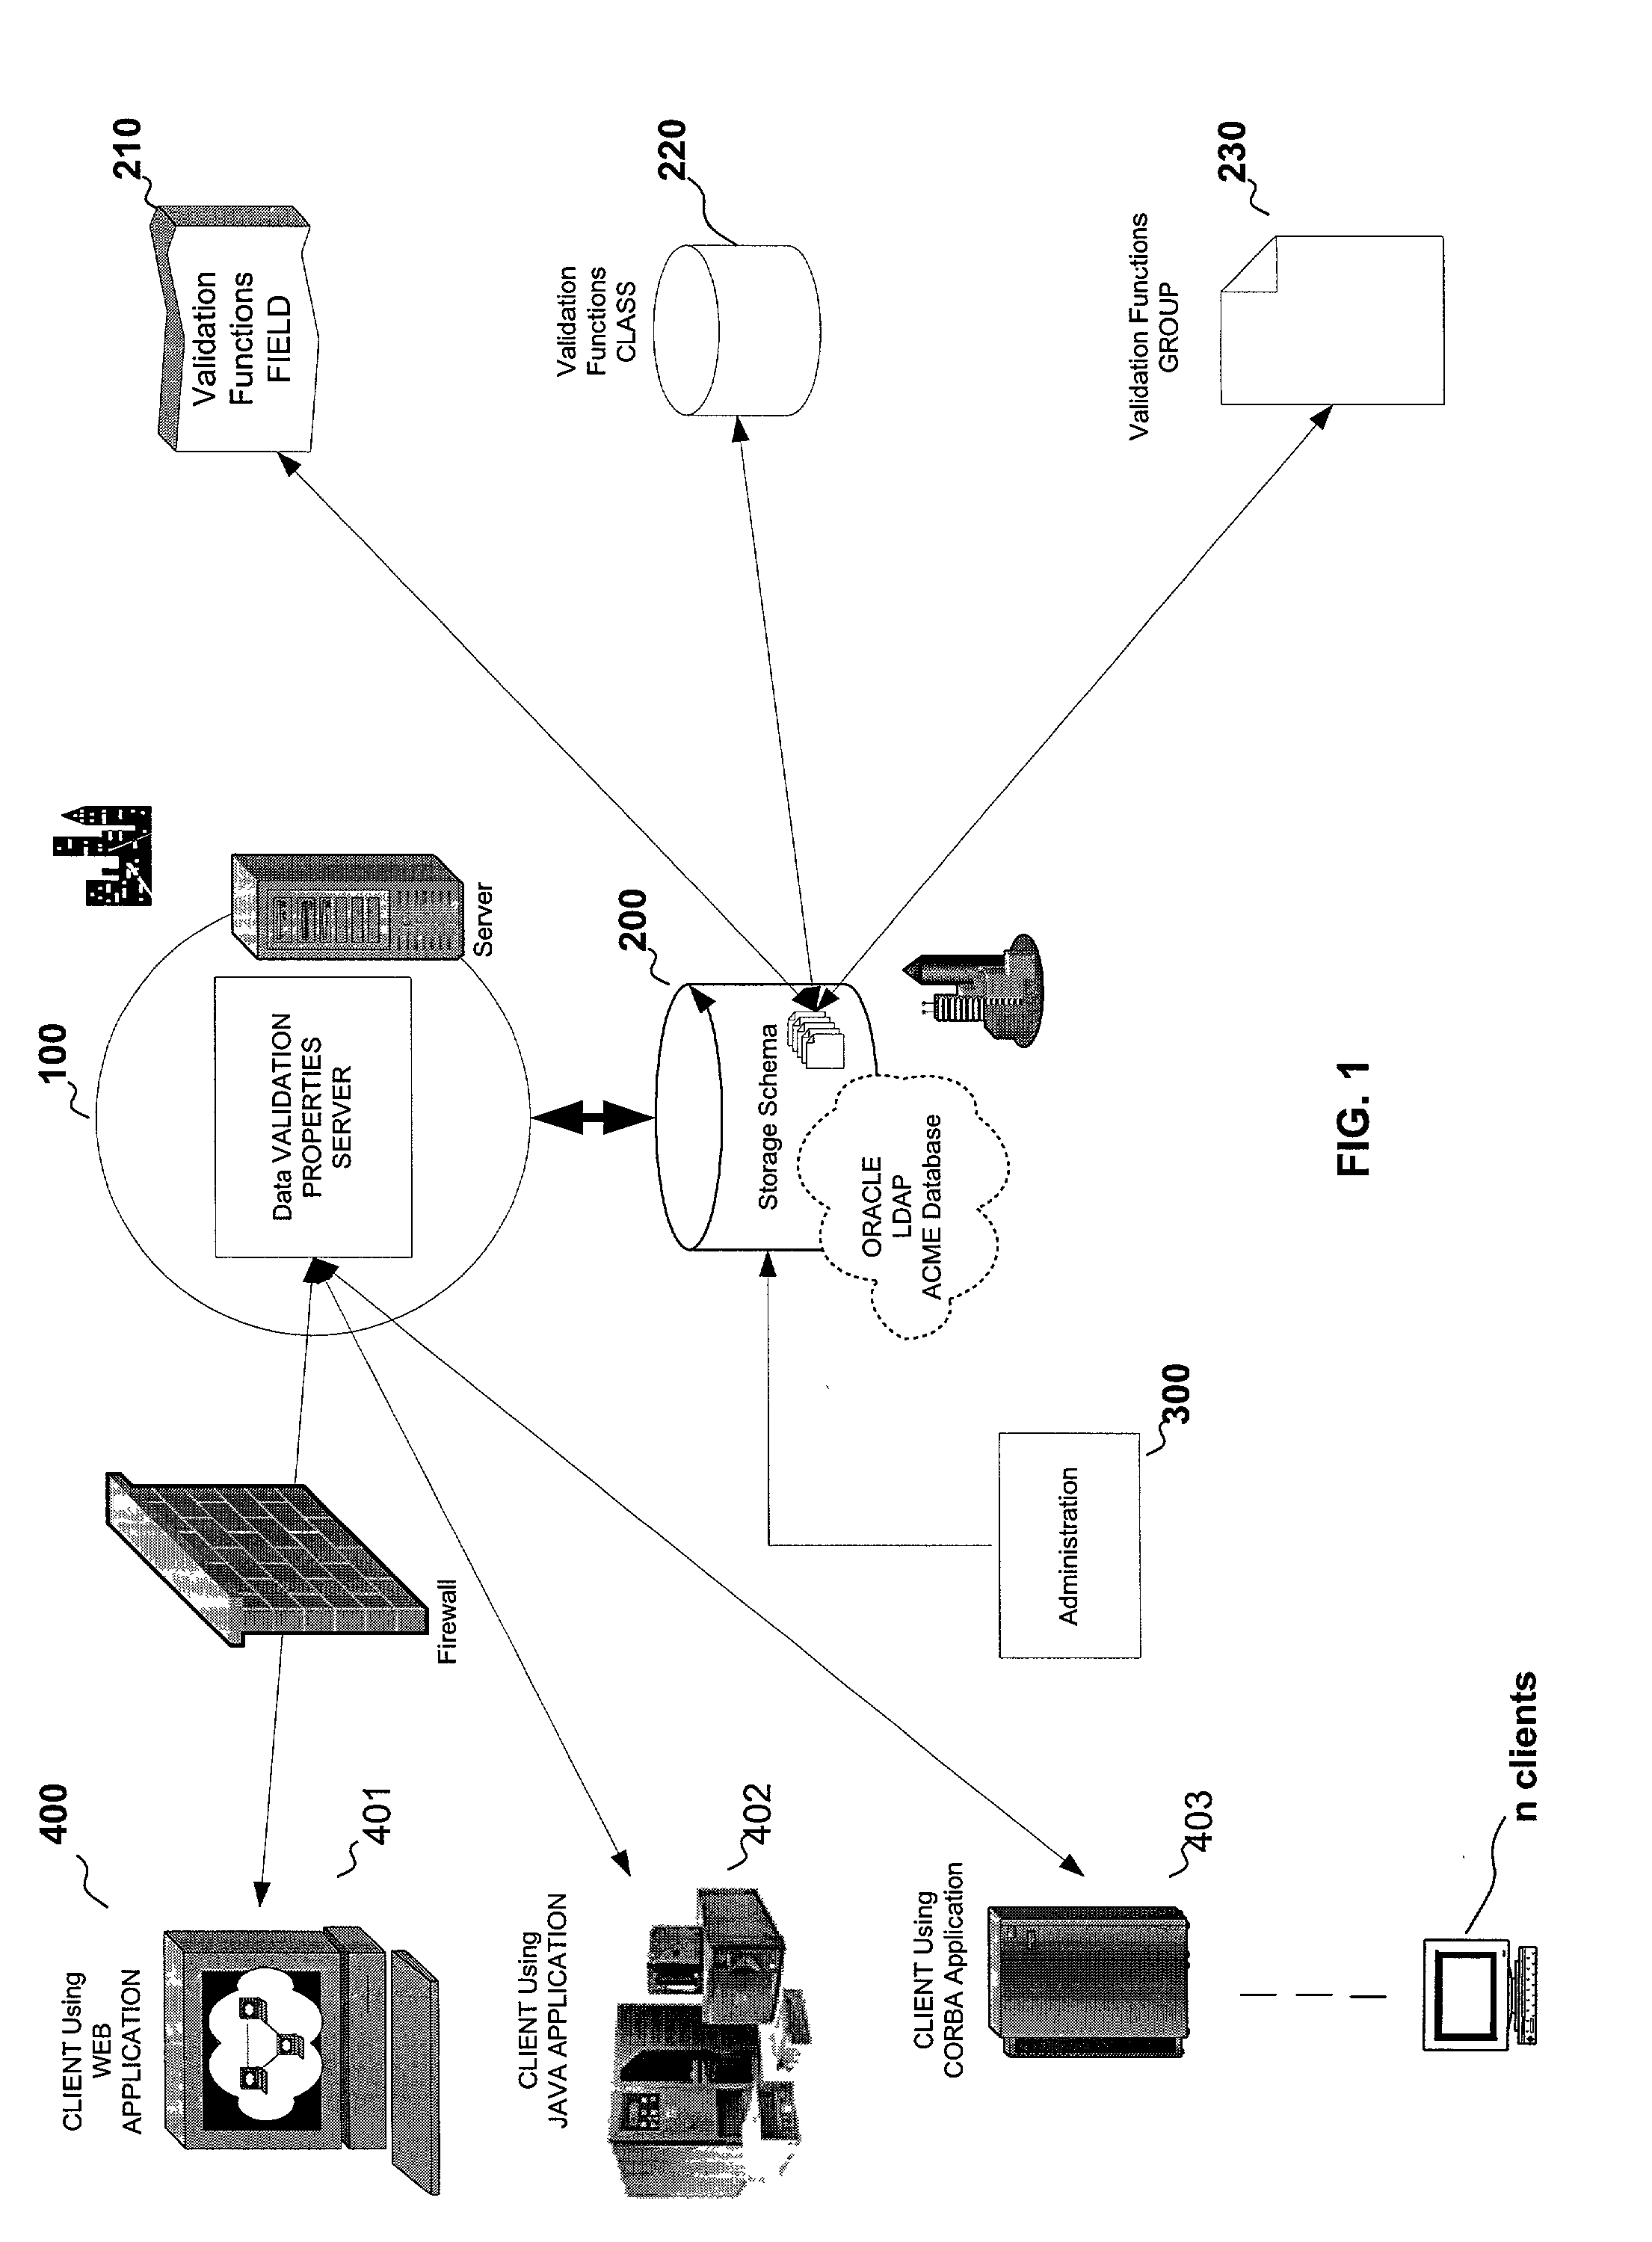 System and method for using web-based applications to validate data with validation functions